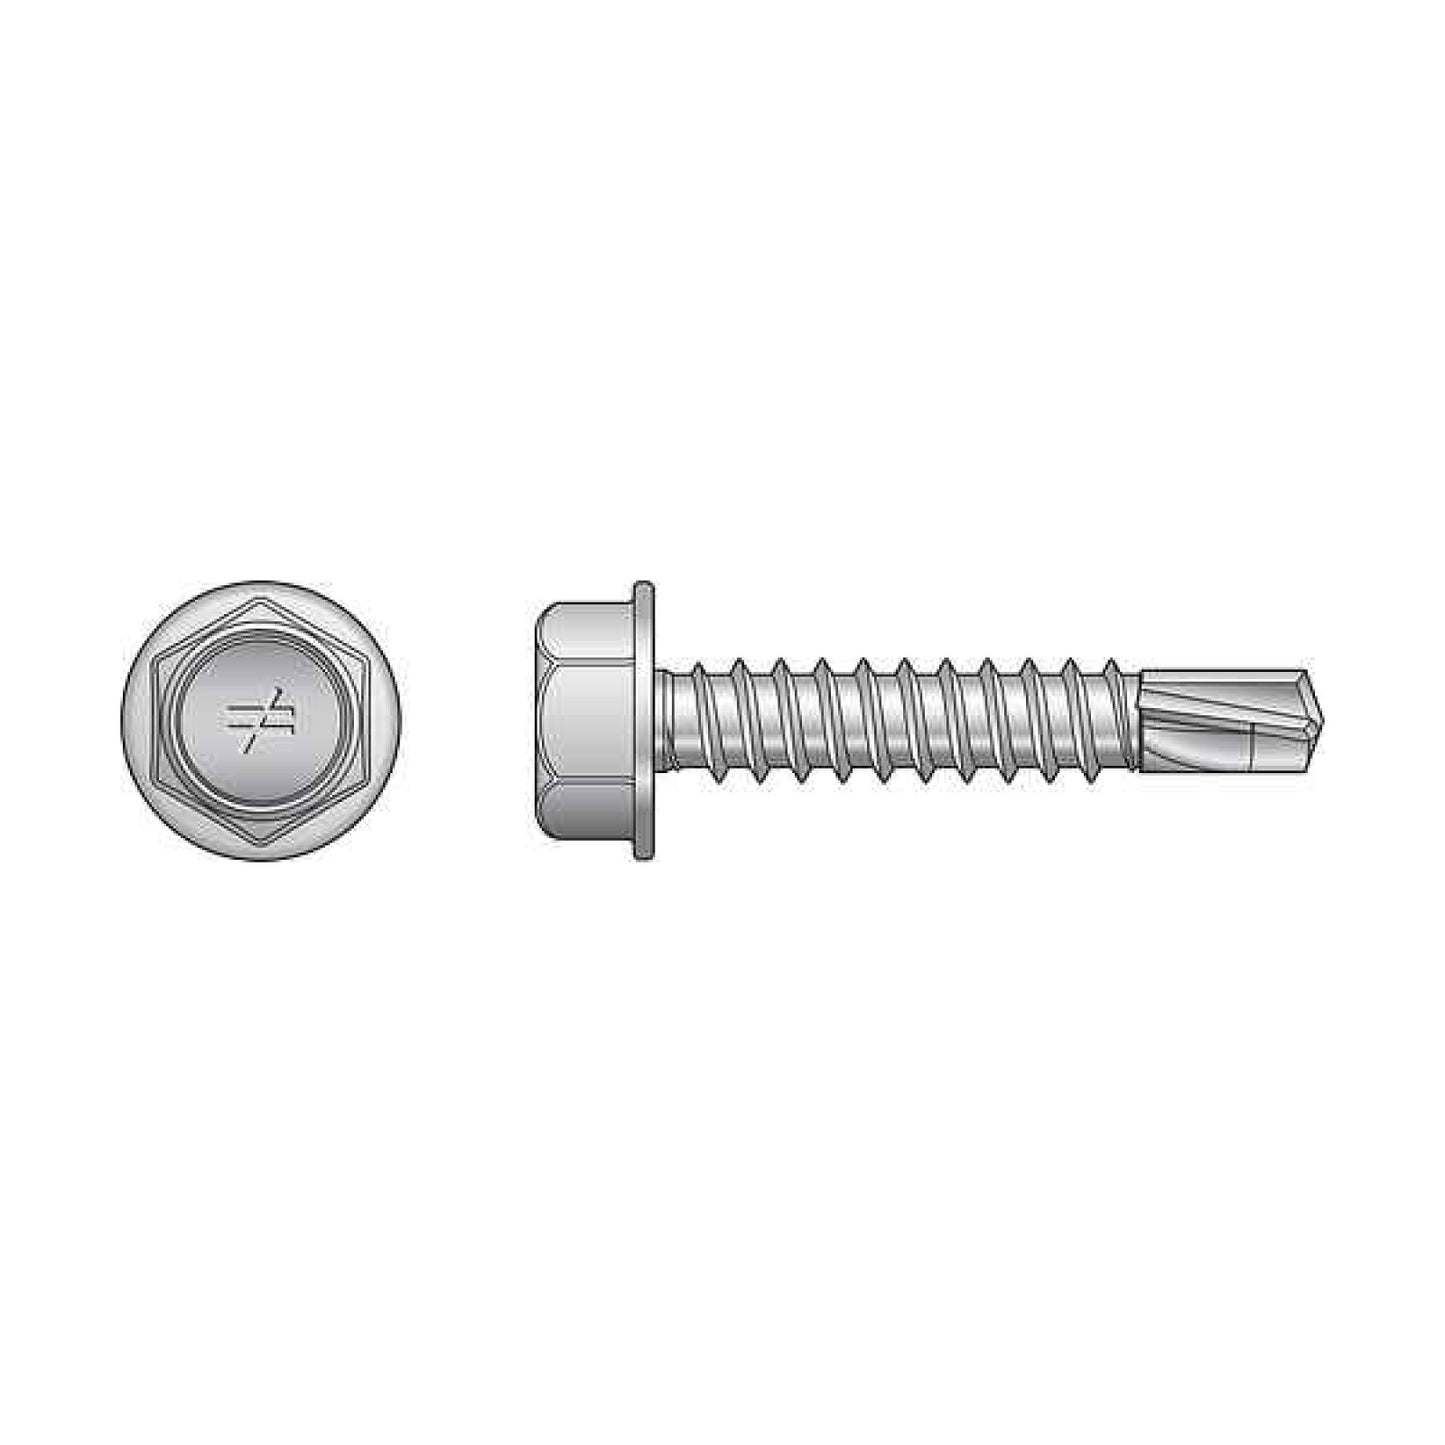 Simpson X1B1016-4K #10 x 1" Strong-Drive Self-Drilling Screw - Clear Zinc Coating - Loose - Pkg 4,000 illustrated